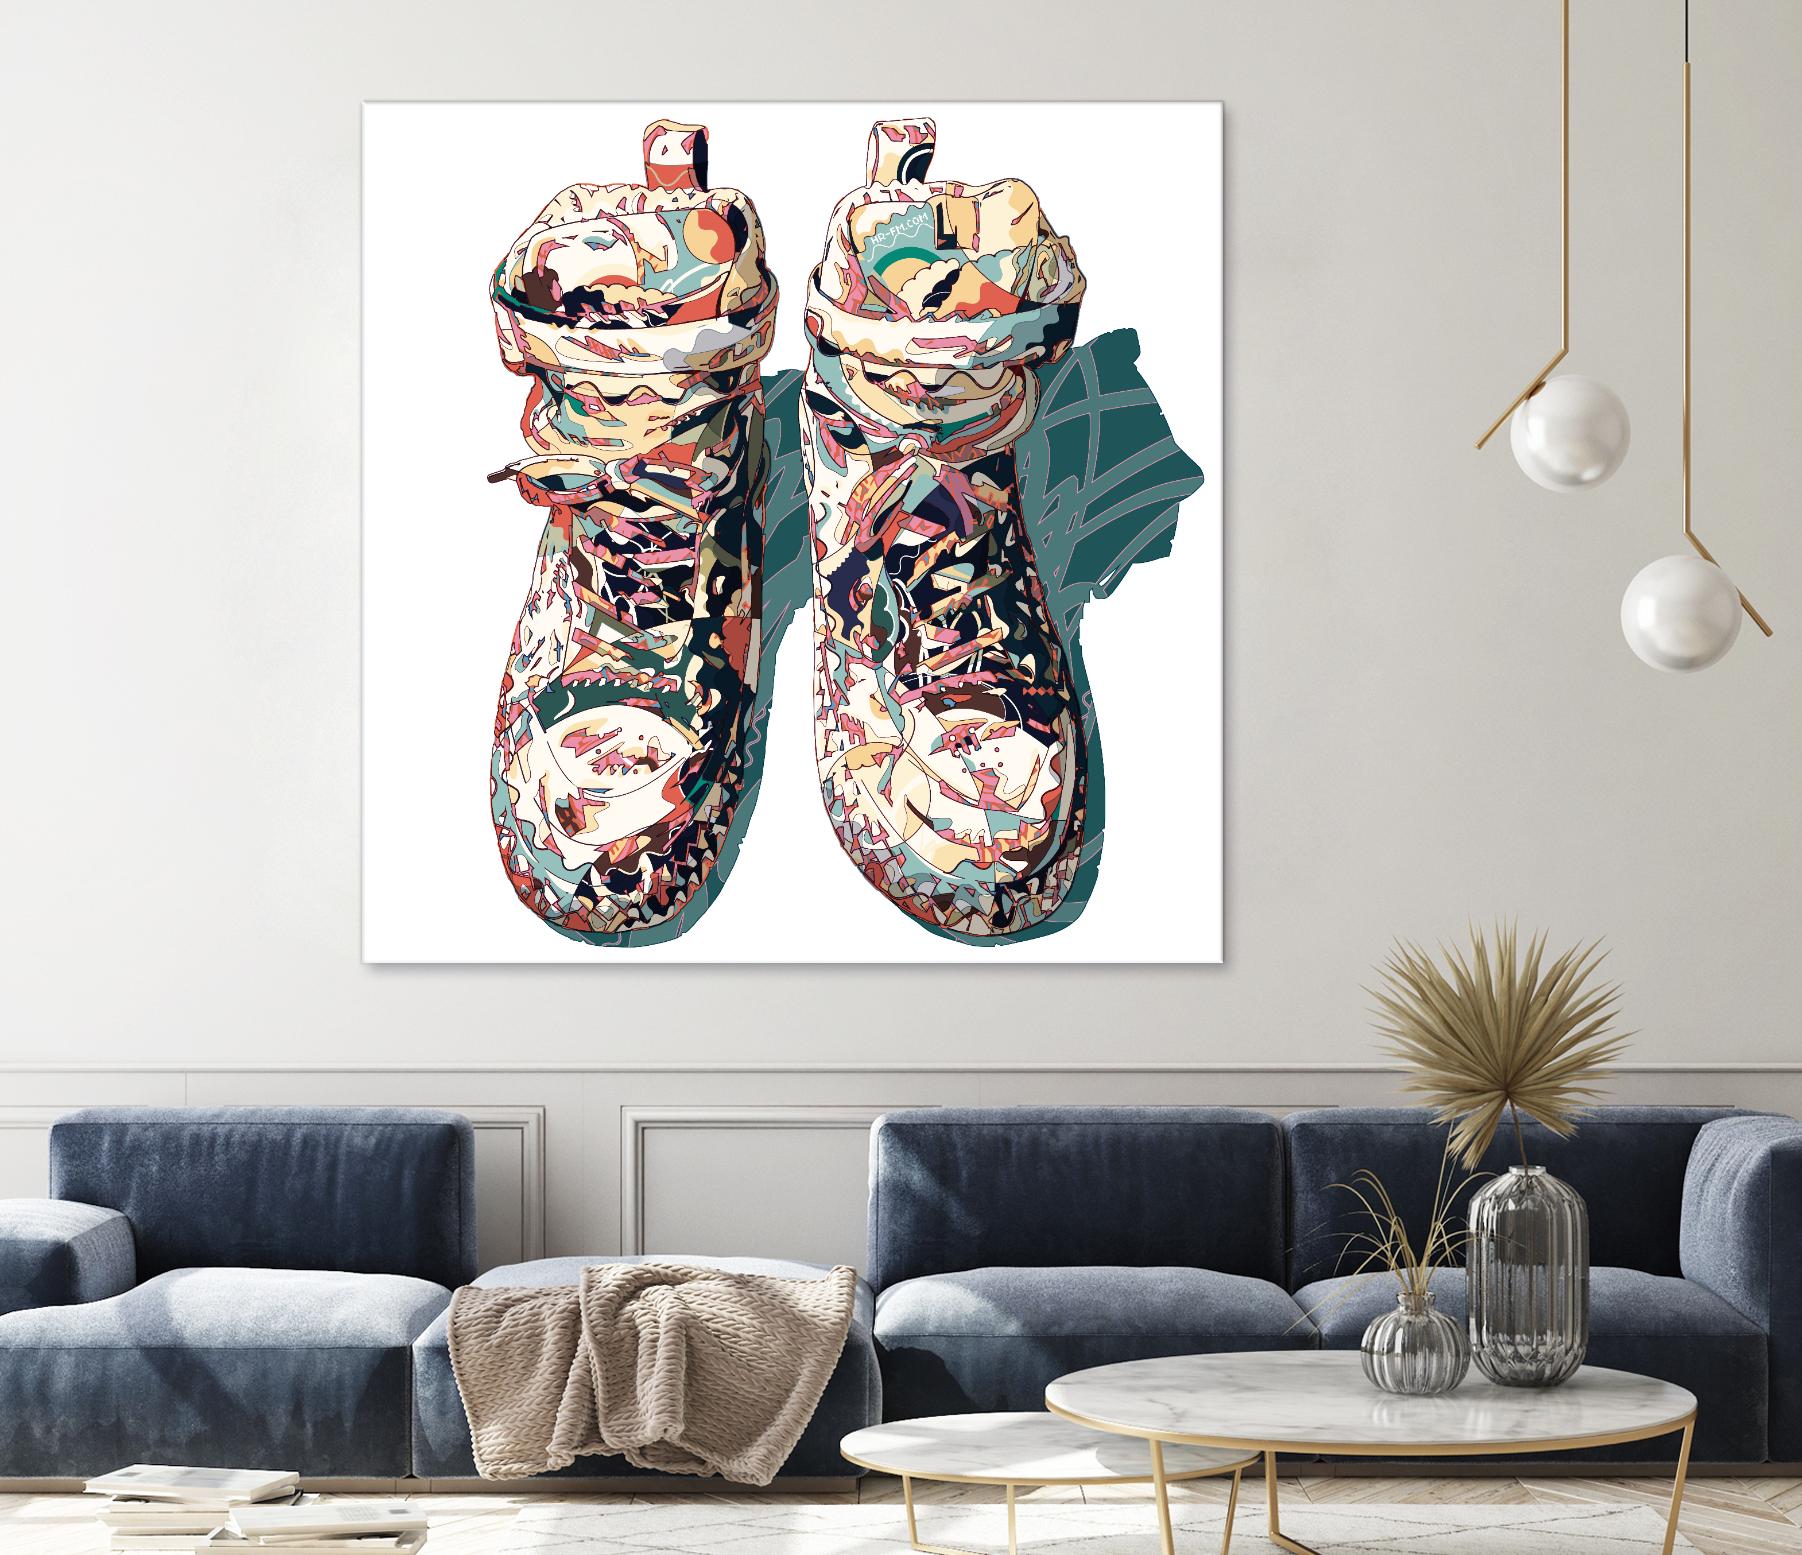 Amazon.com: Shoes Sneaker Art Hypebeast Pop Art Artworks Poster Paper 20x30  inch : Handmade Products